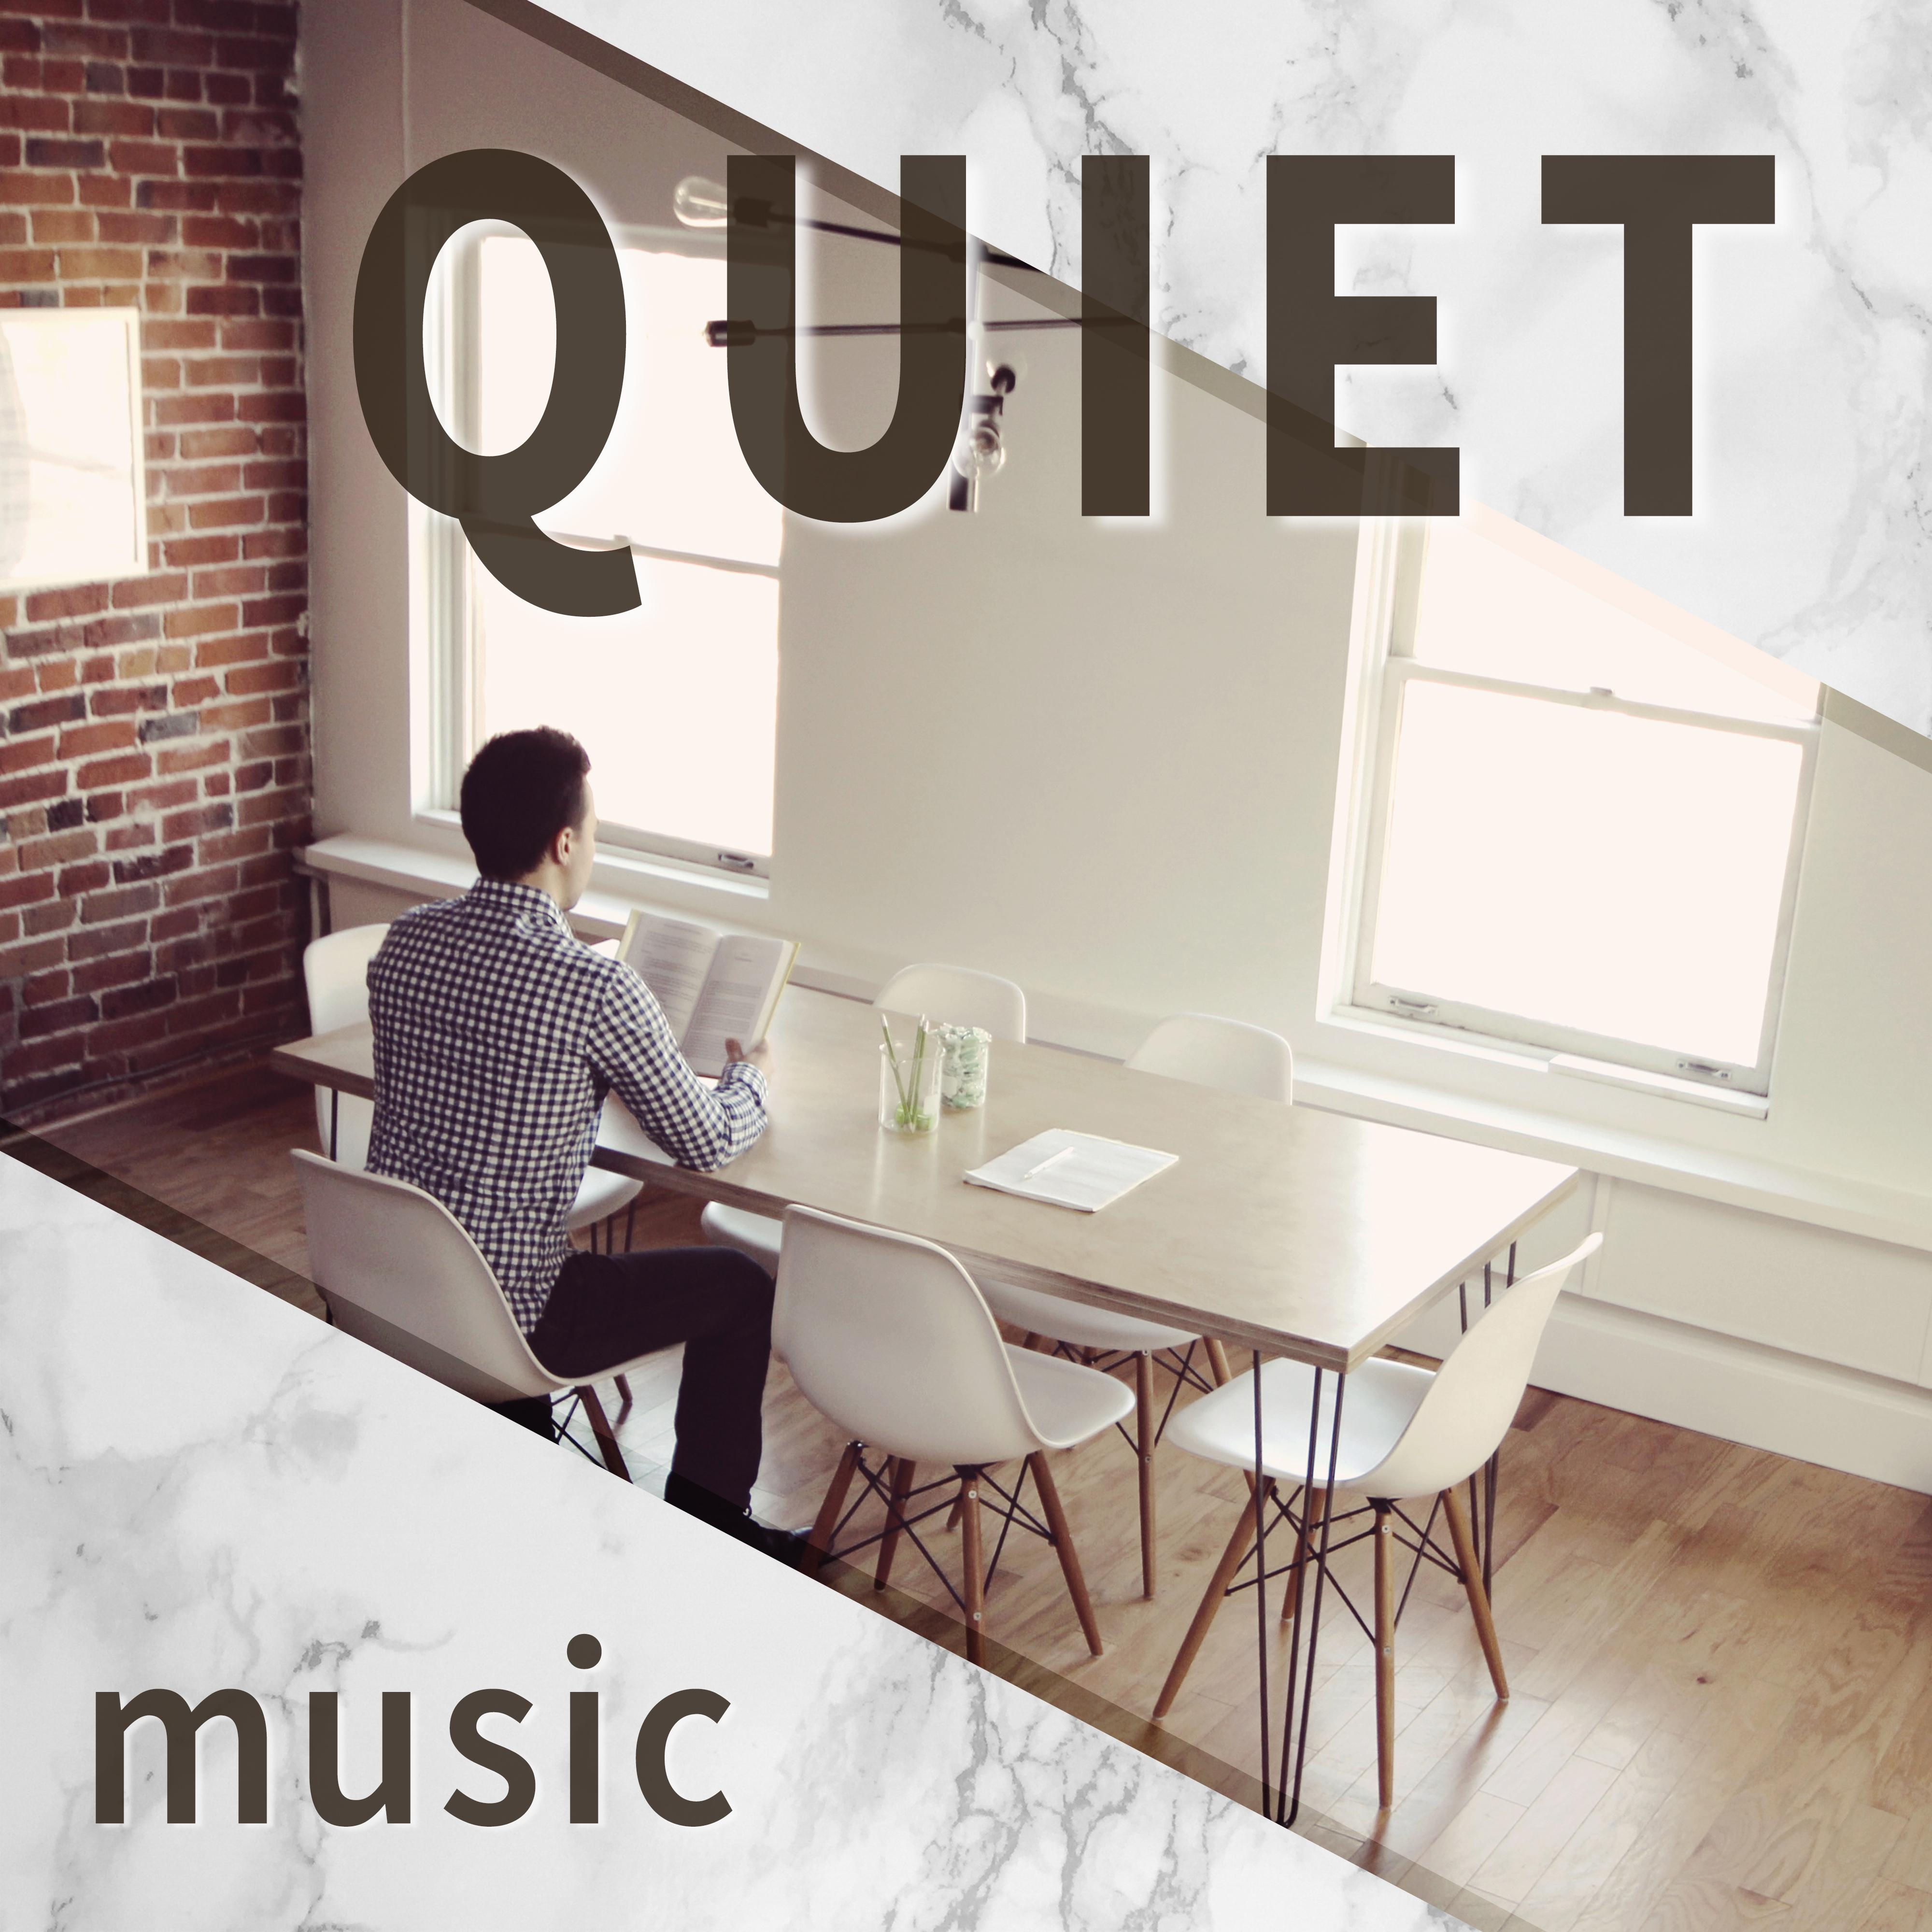 Quiet Music  New Age Peaceful Music for Learning, Soft Sounds to Calm Down, Do Homework, Relaxing Music